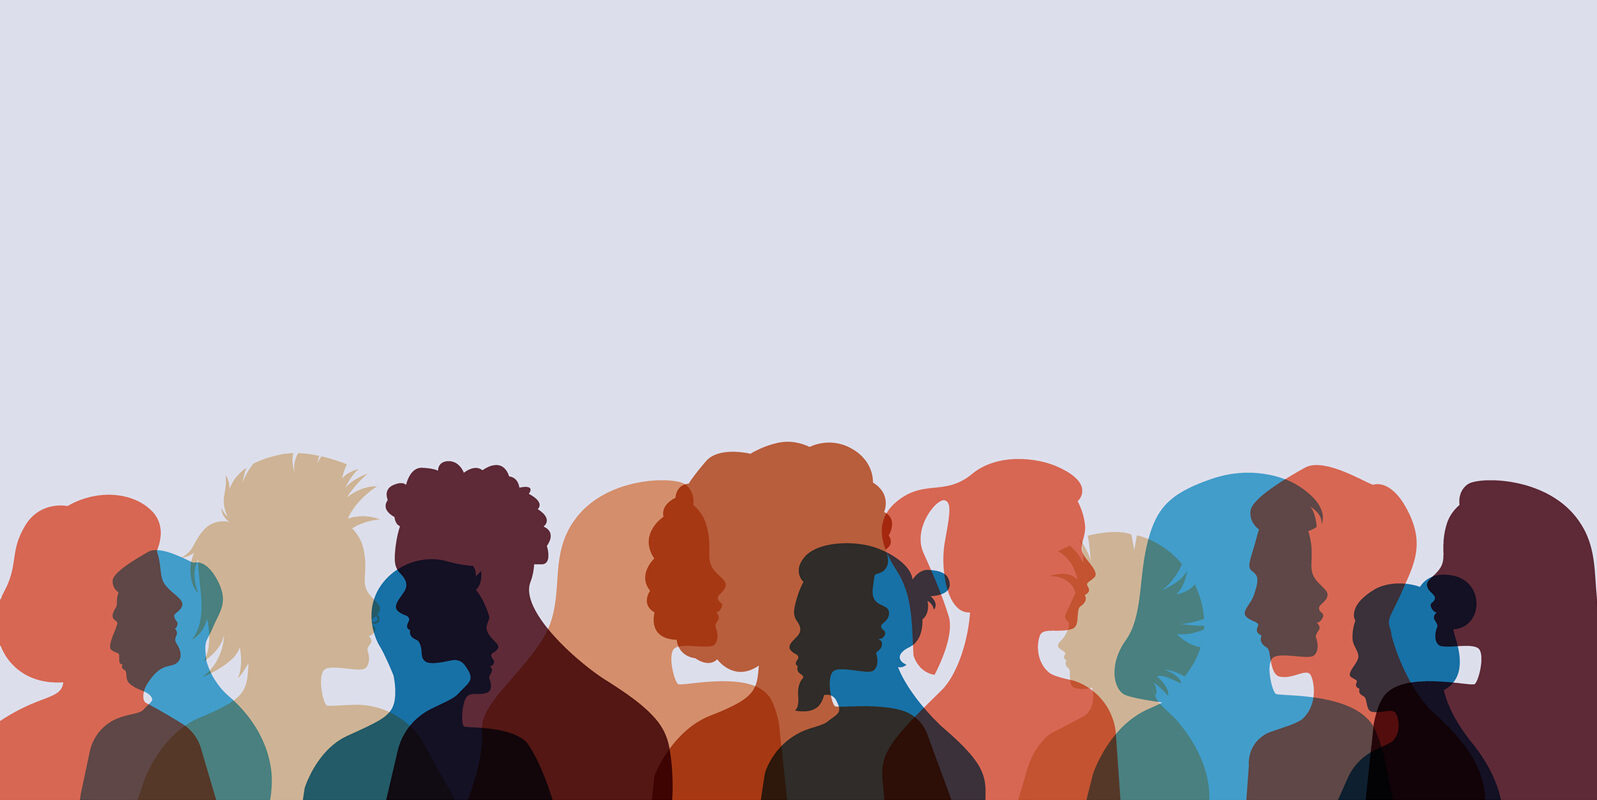 A silhouette of a diverse group of individuals standing against a backdrop.